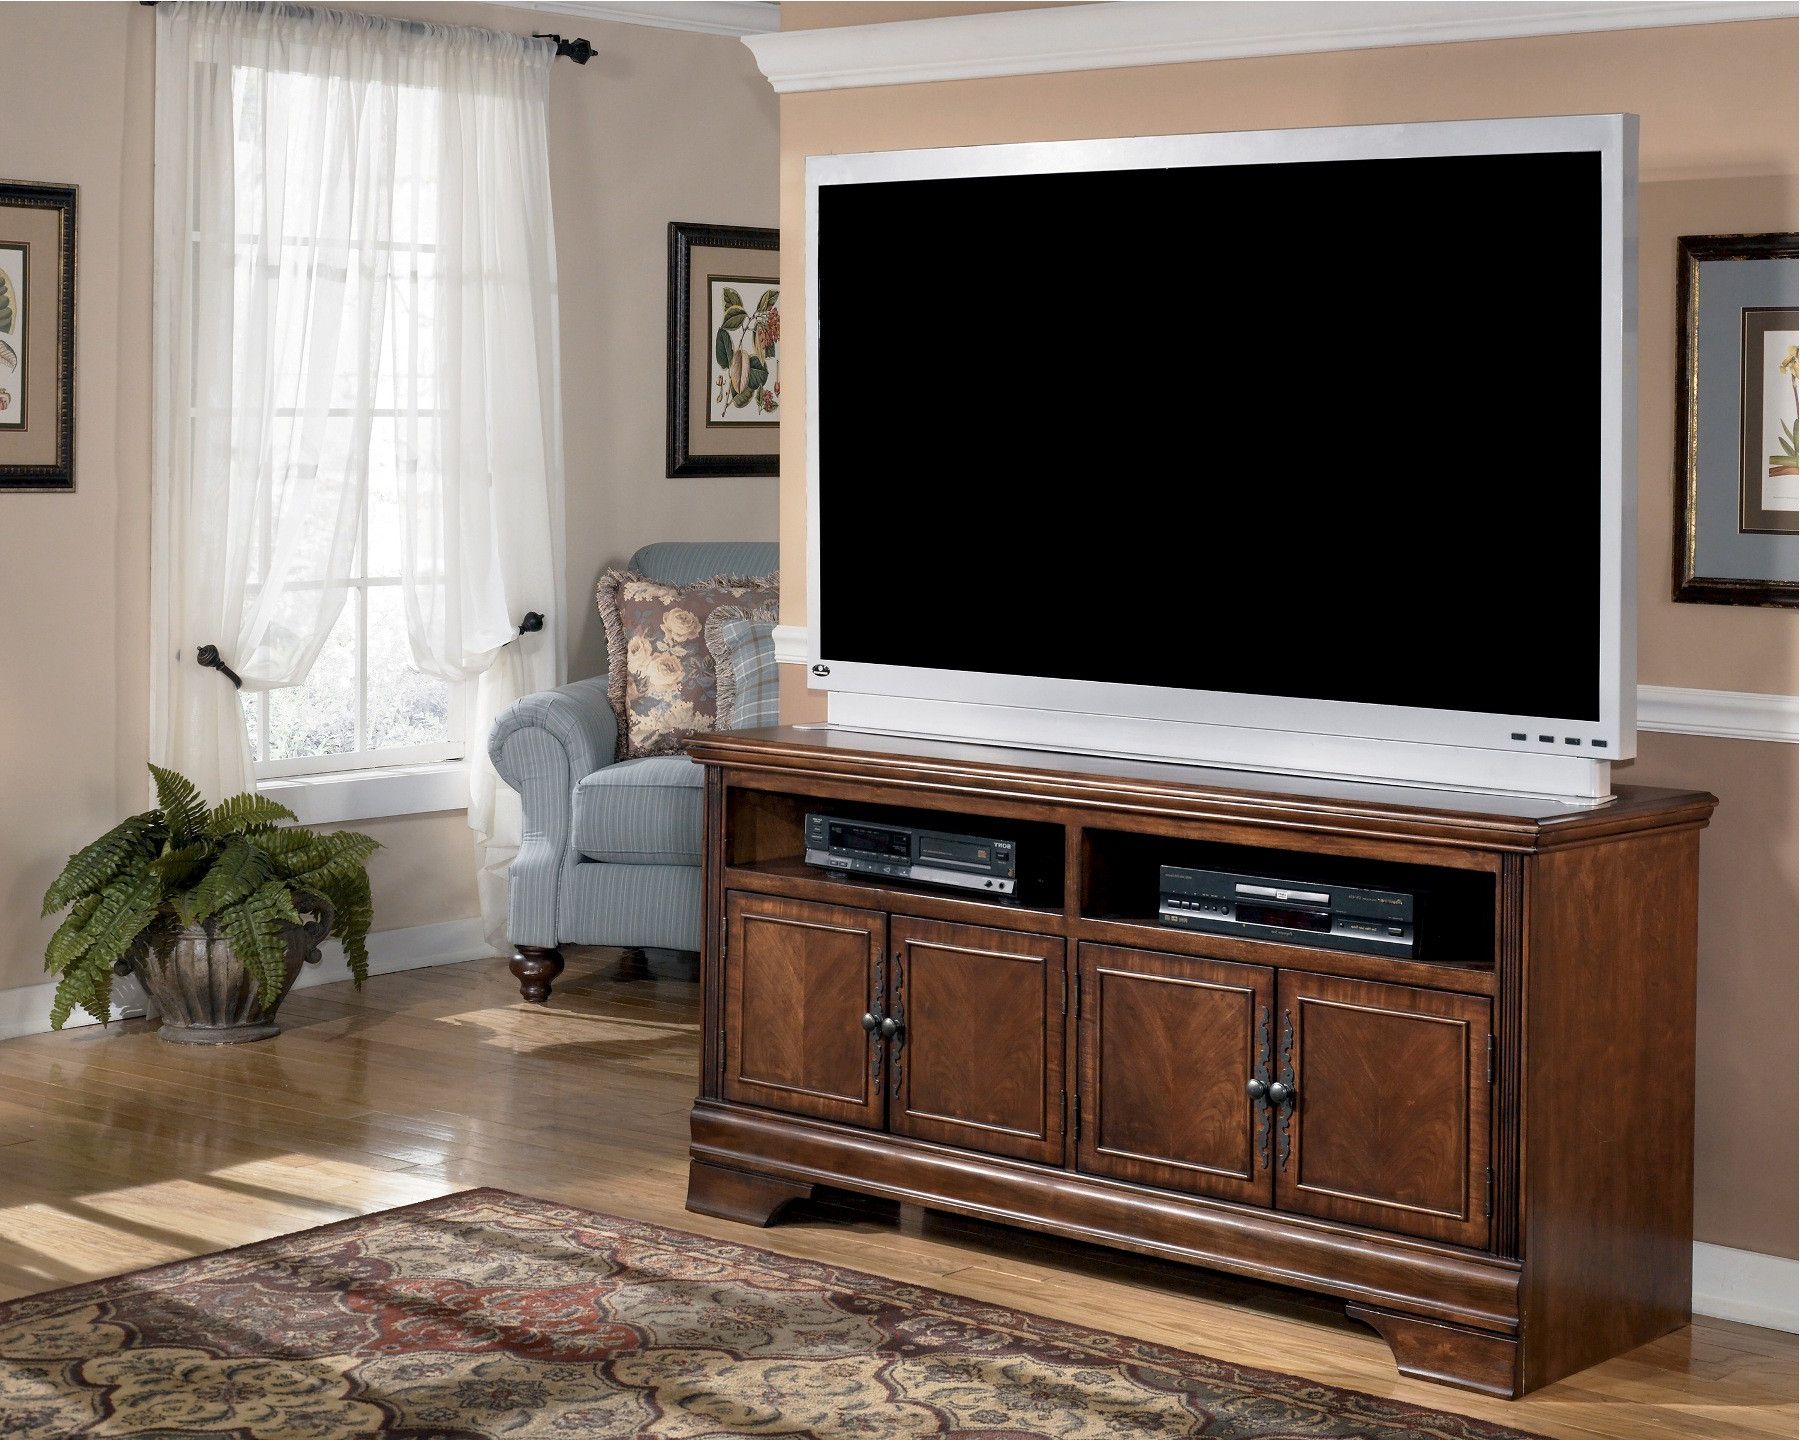 Hamlyn 60 Inch Tv Stand From Ashley (w527 38) | Coleman Intended For Evelynn Tv Stands For Tvs Up To 60" (Gallery 12 of 20)